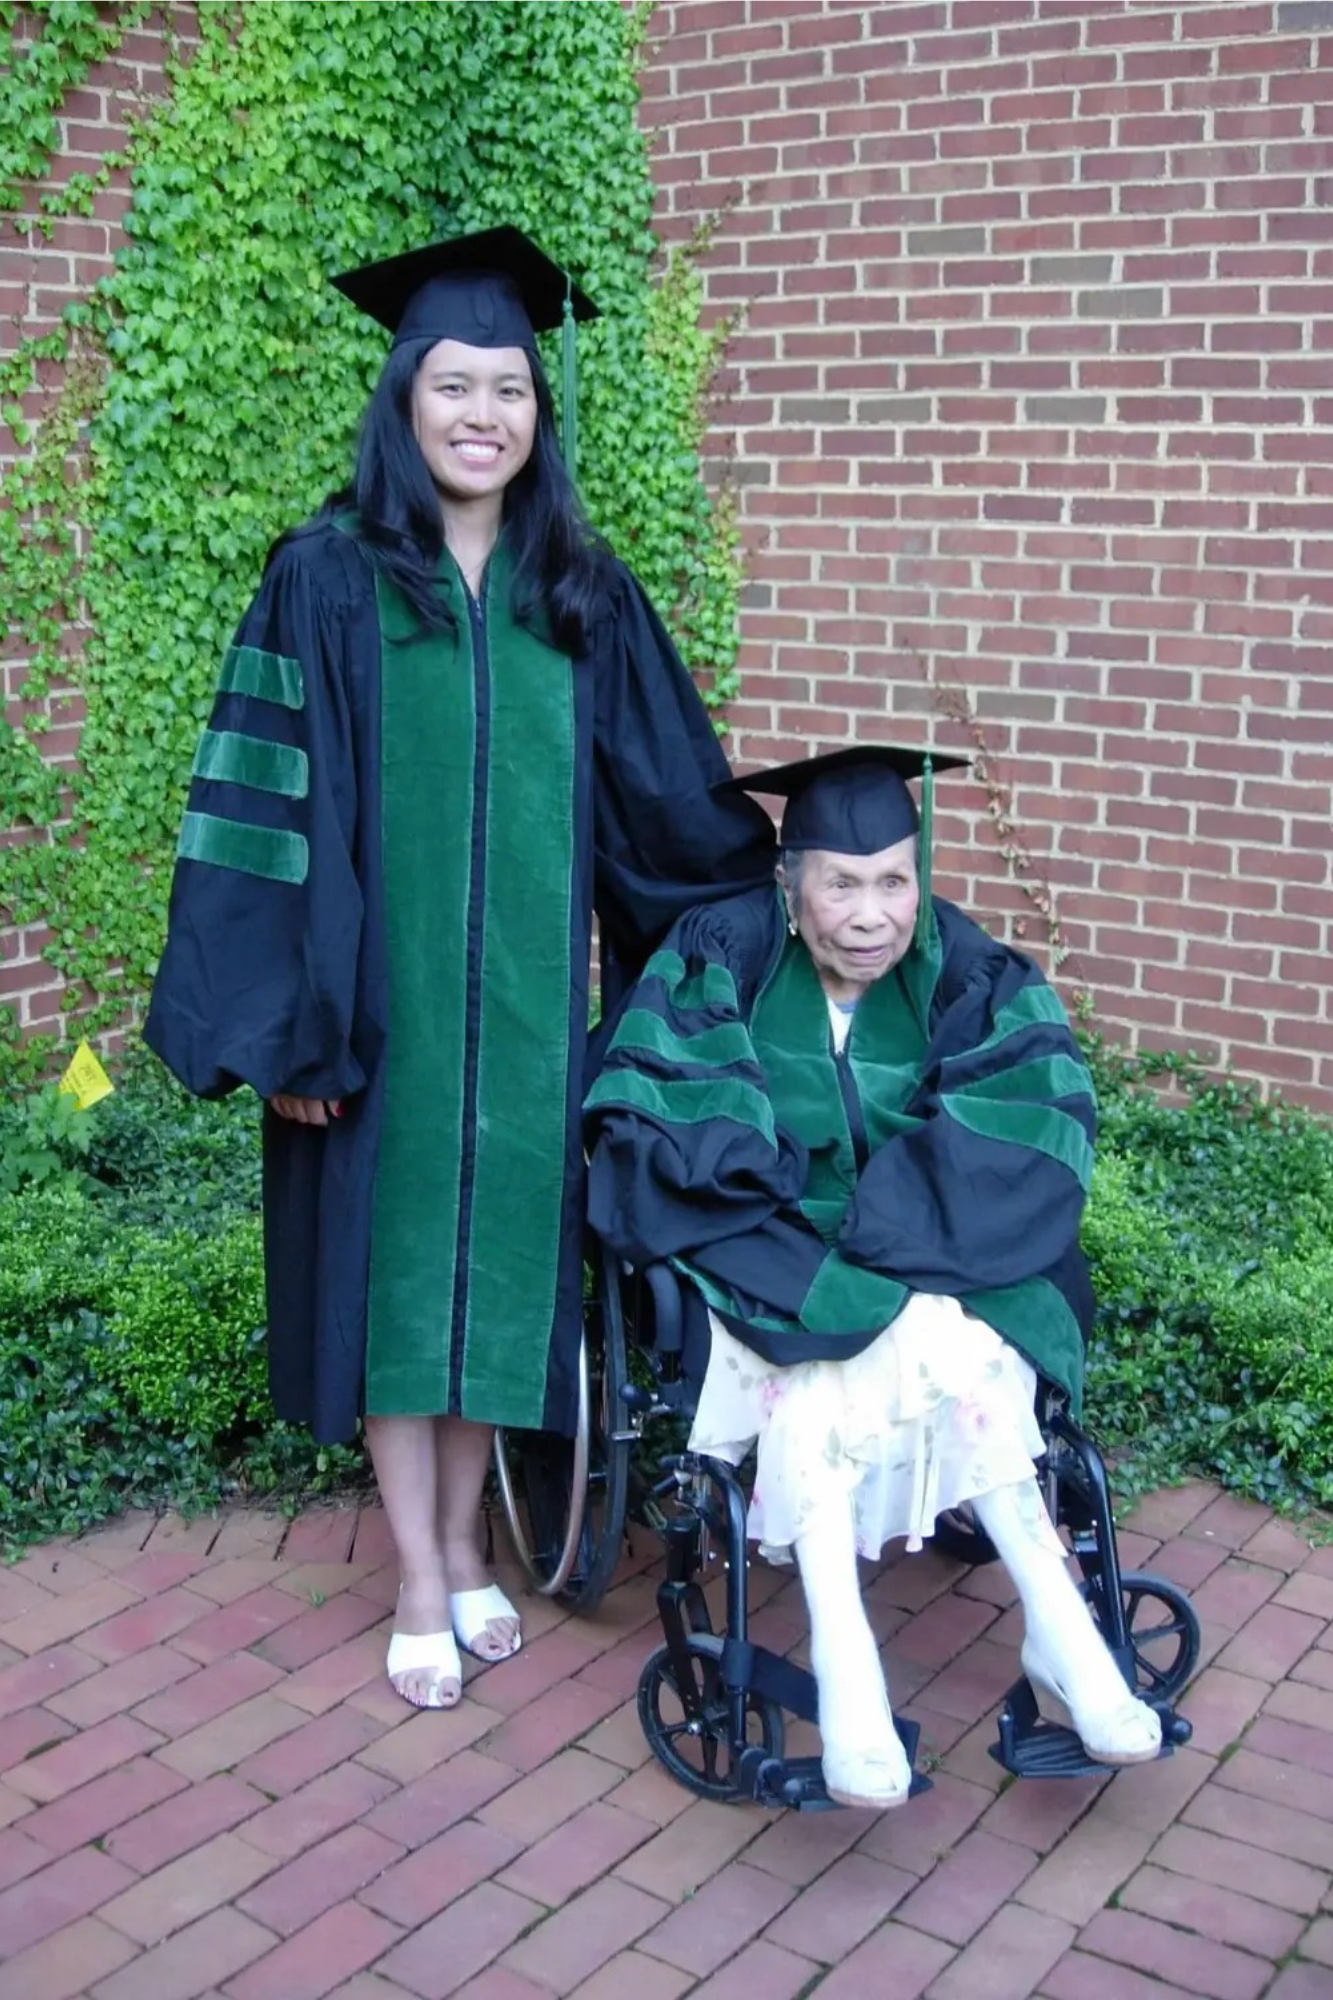 A female medical school graduate poses with her grandmother while both wear academic regalia.